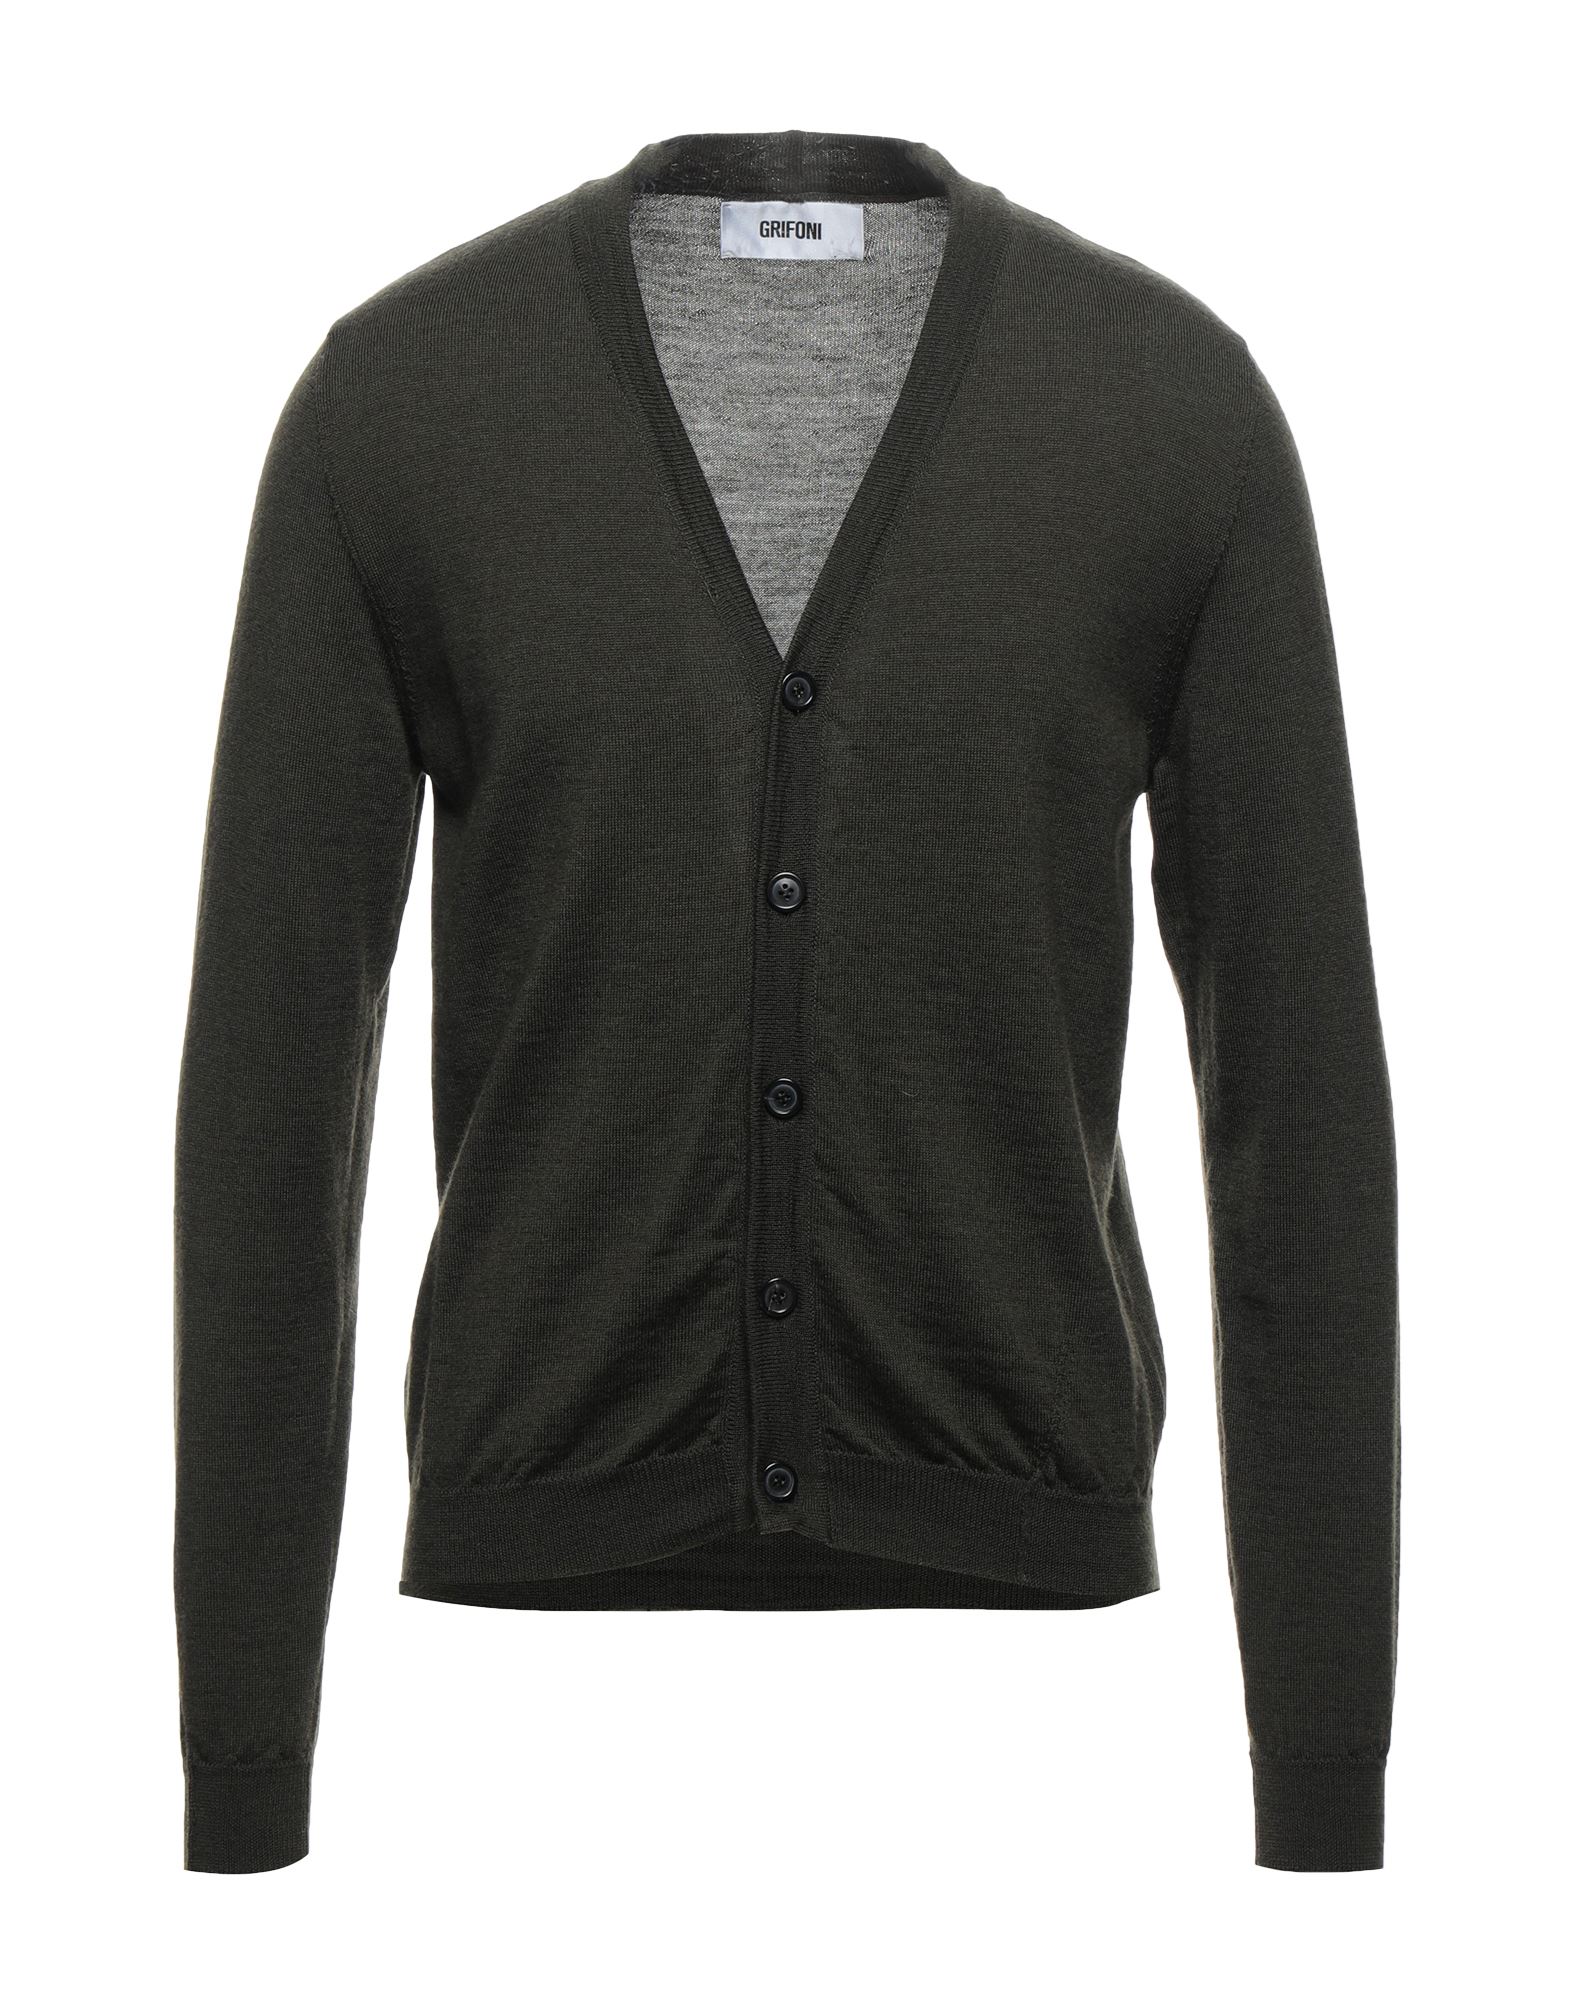 Mauro Grifoni Cardigans In Military Green